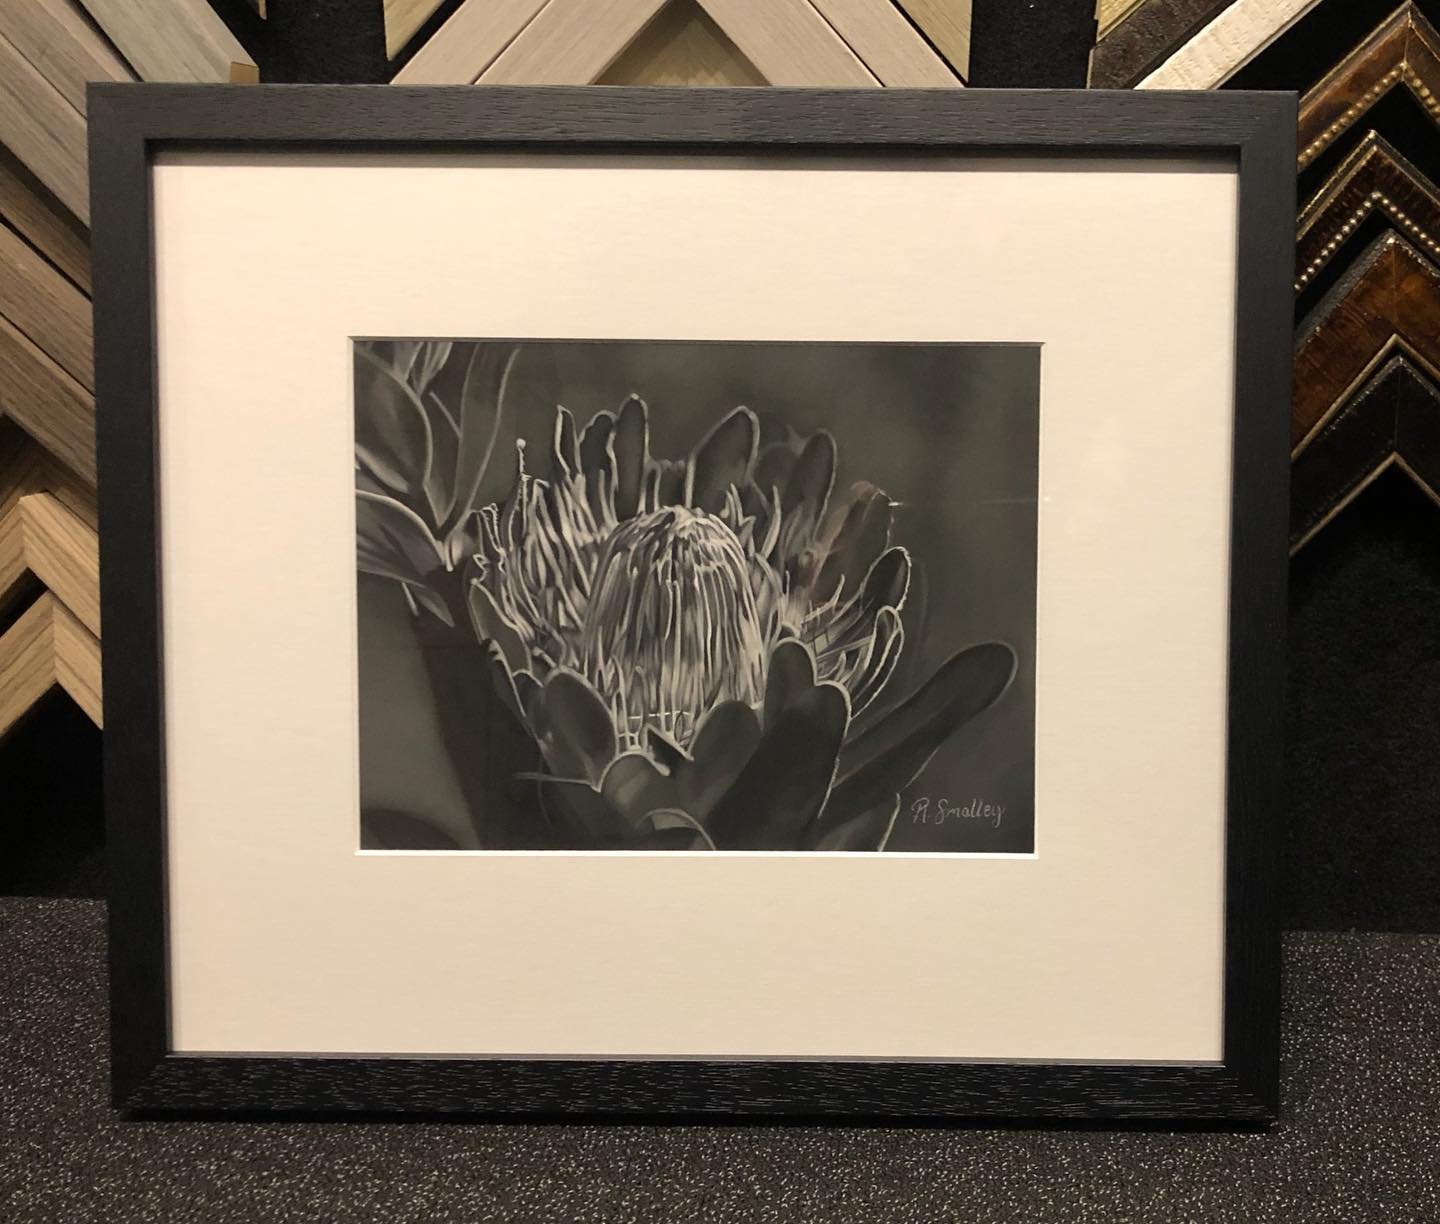 The art of simplicity from black and white. The perfect duo

#alburypictureframers #alburyframing #alburyframer #alburycustomframing #alburywodonga #alburypictureframing #alburybusiness #amplane